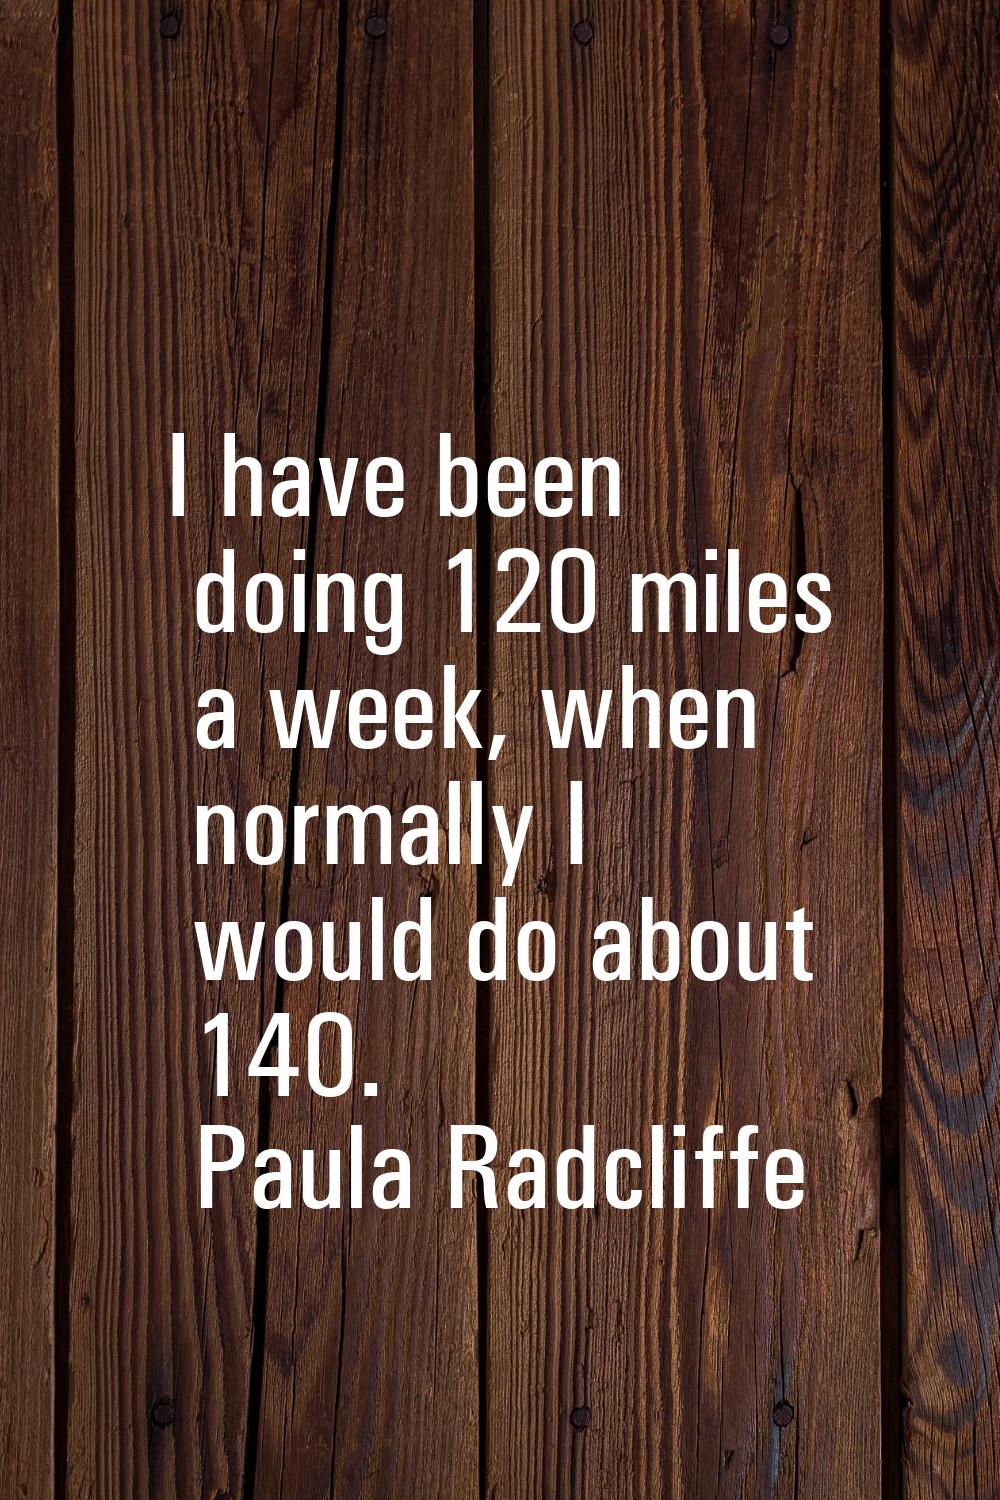 I have been doing 120 miles a week, when normally I would do about 140.